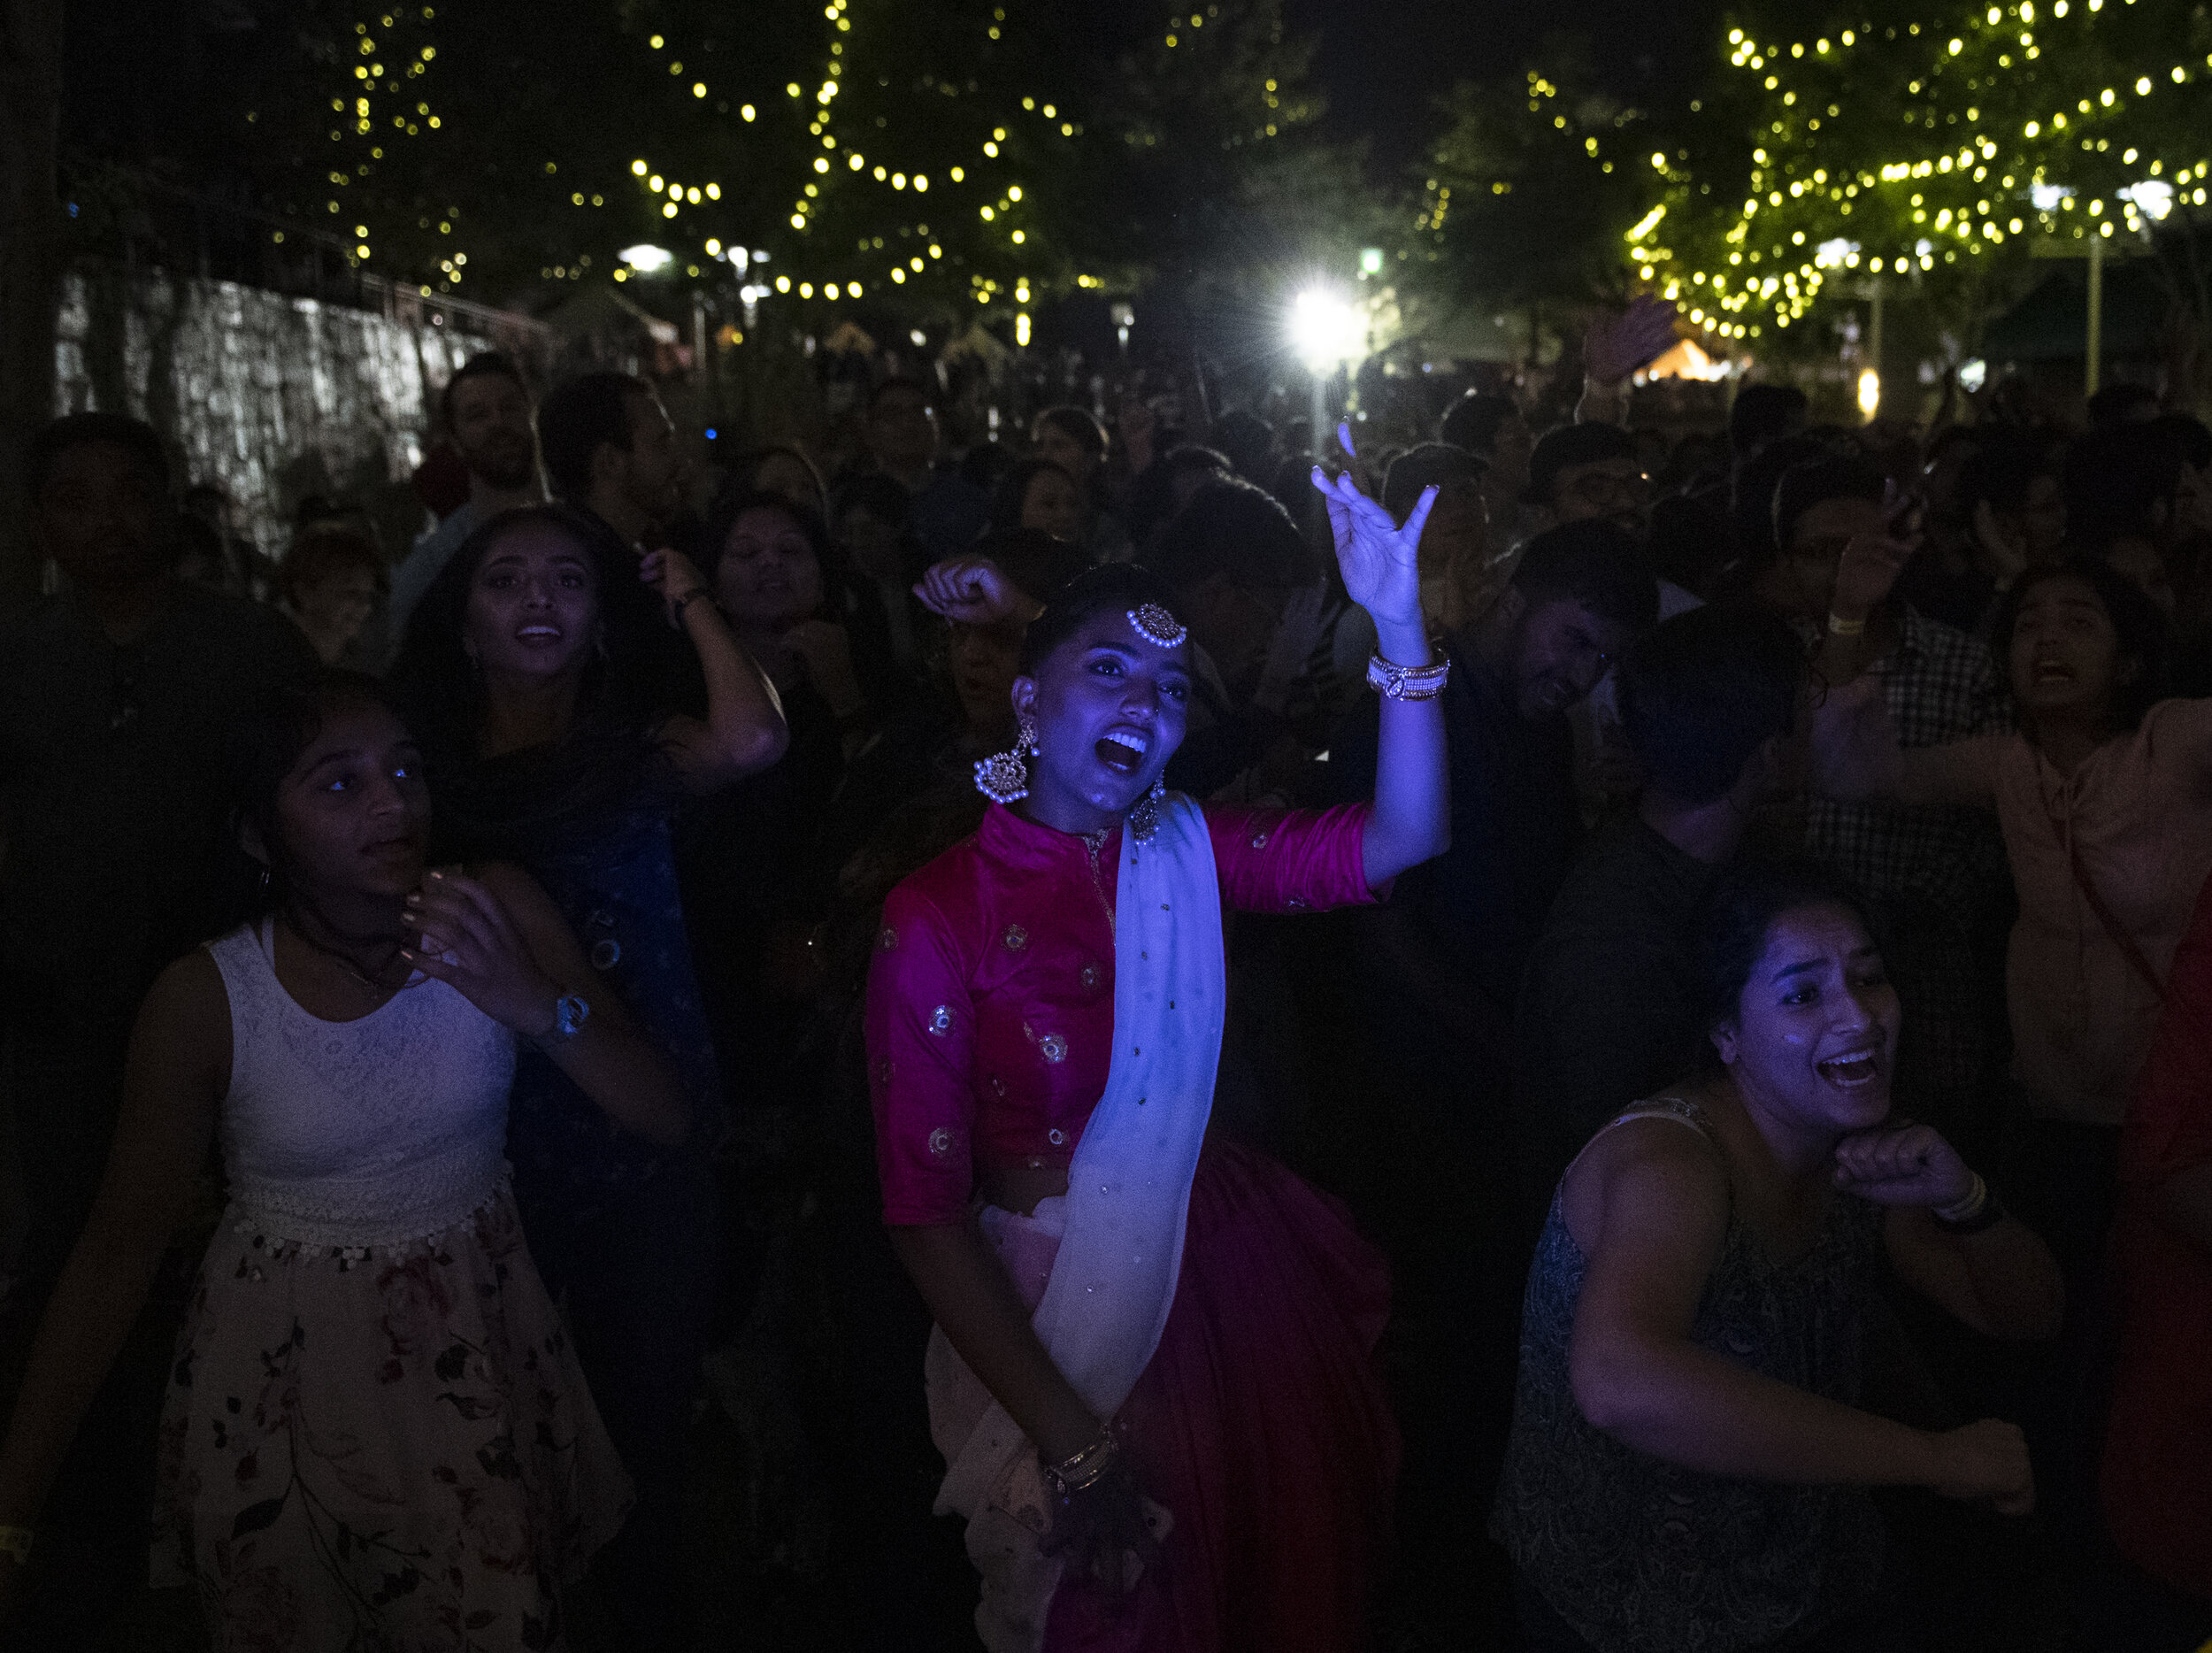  Sangita Kerai dances during the dance party at the end of India Day in Greenville Saturday, August 24, 2019. (The Greenville News) 